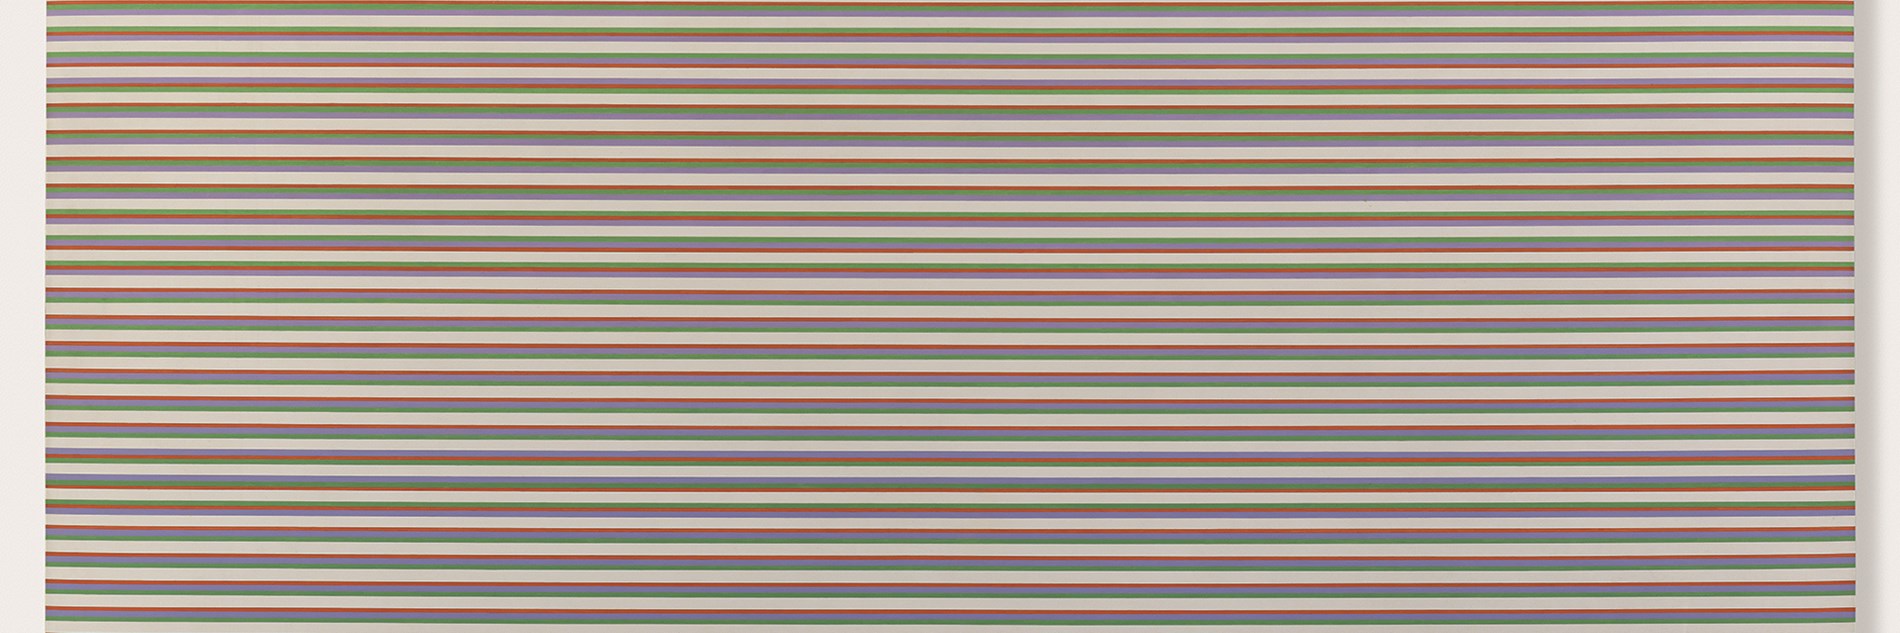 An abstract oil painting of irregularly repeating horizontal lines in cream, green, lilac and orange.